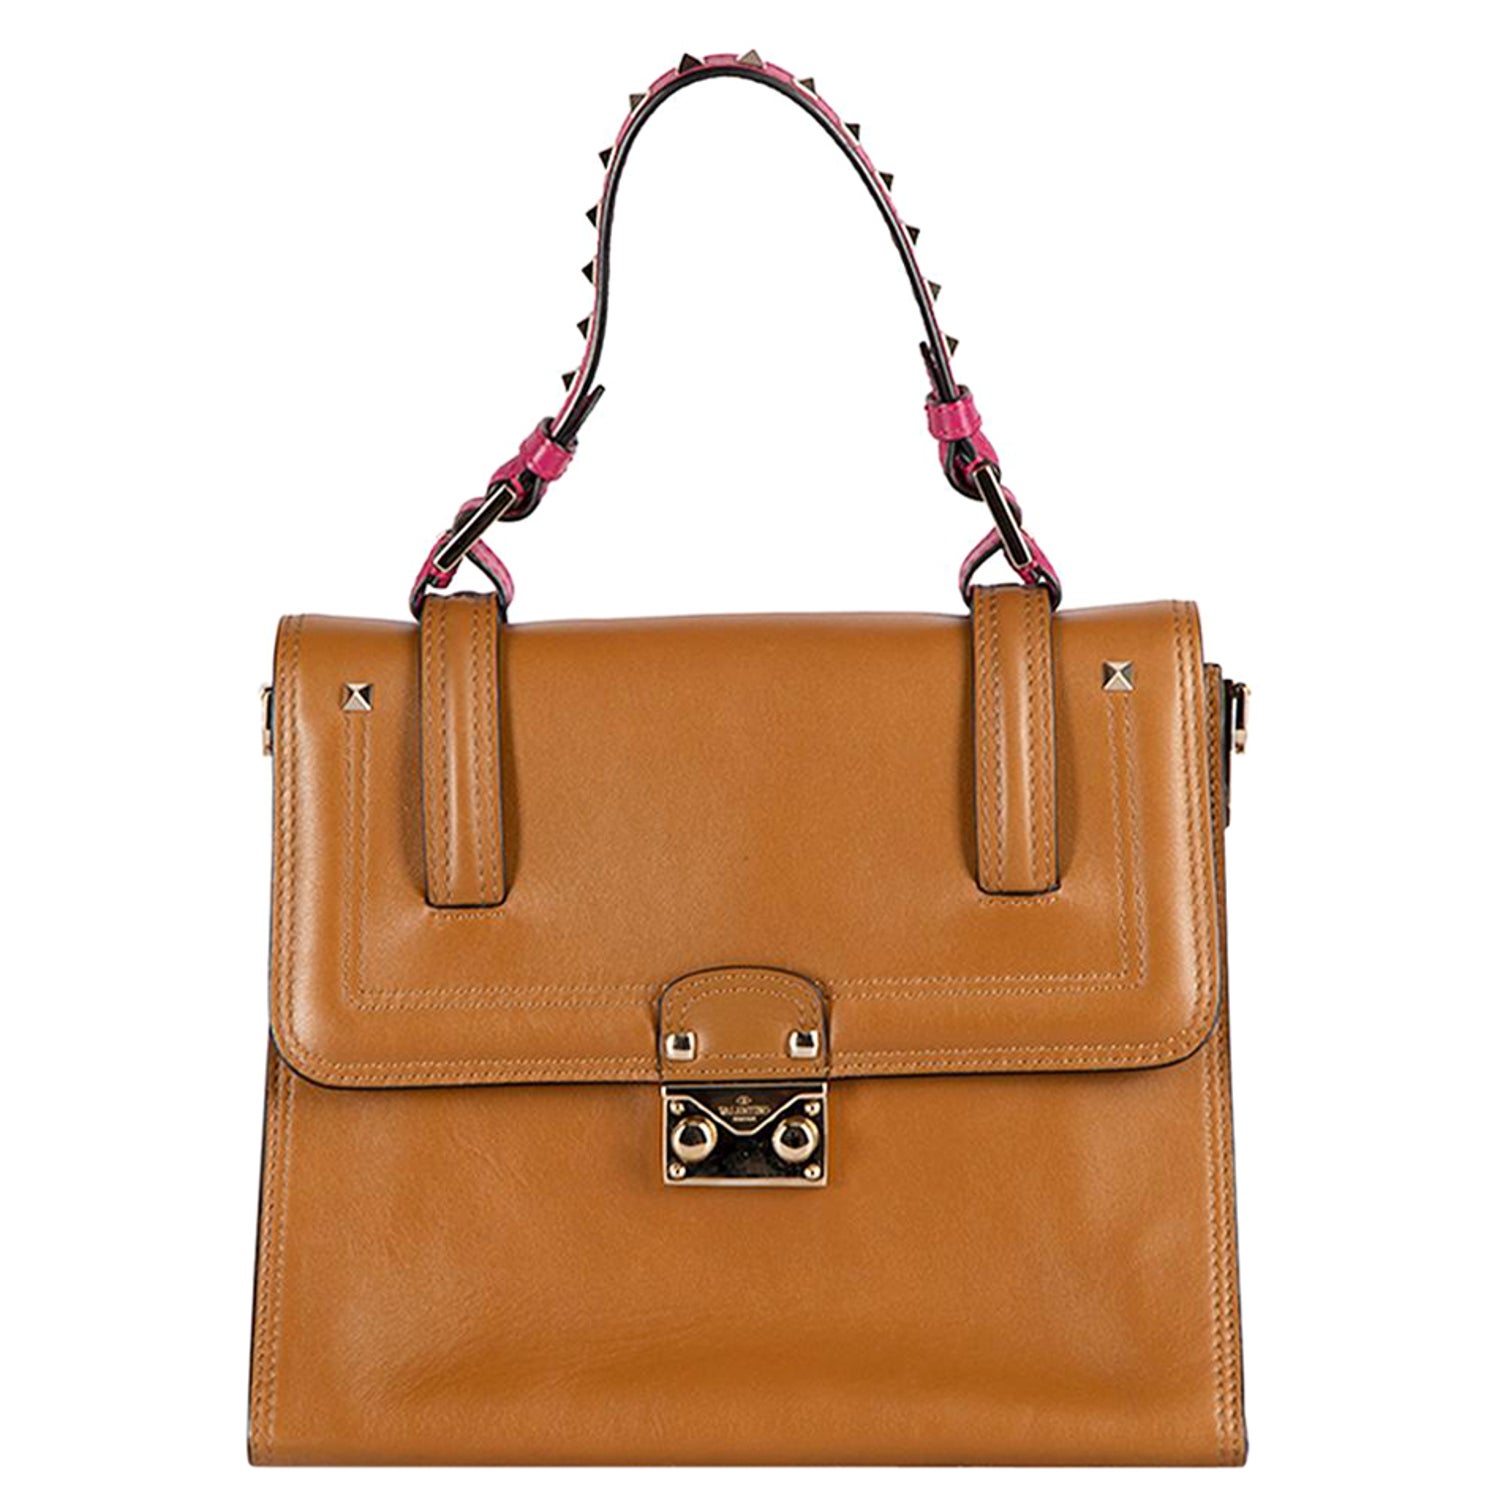 new valentino bags 2021 Hot Sale - OFF 62%